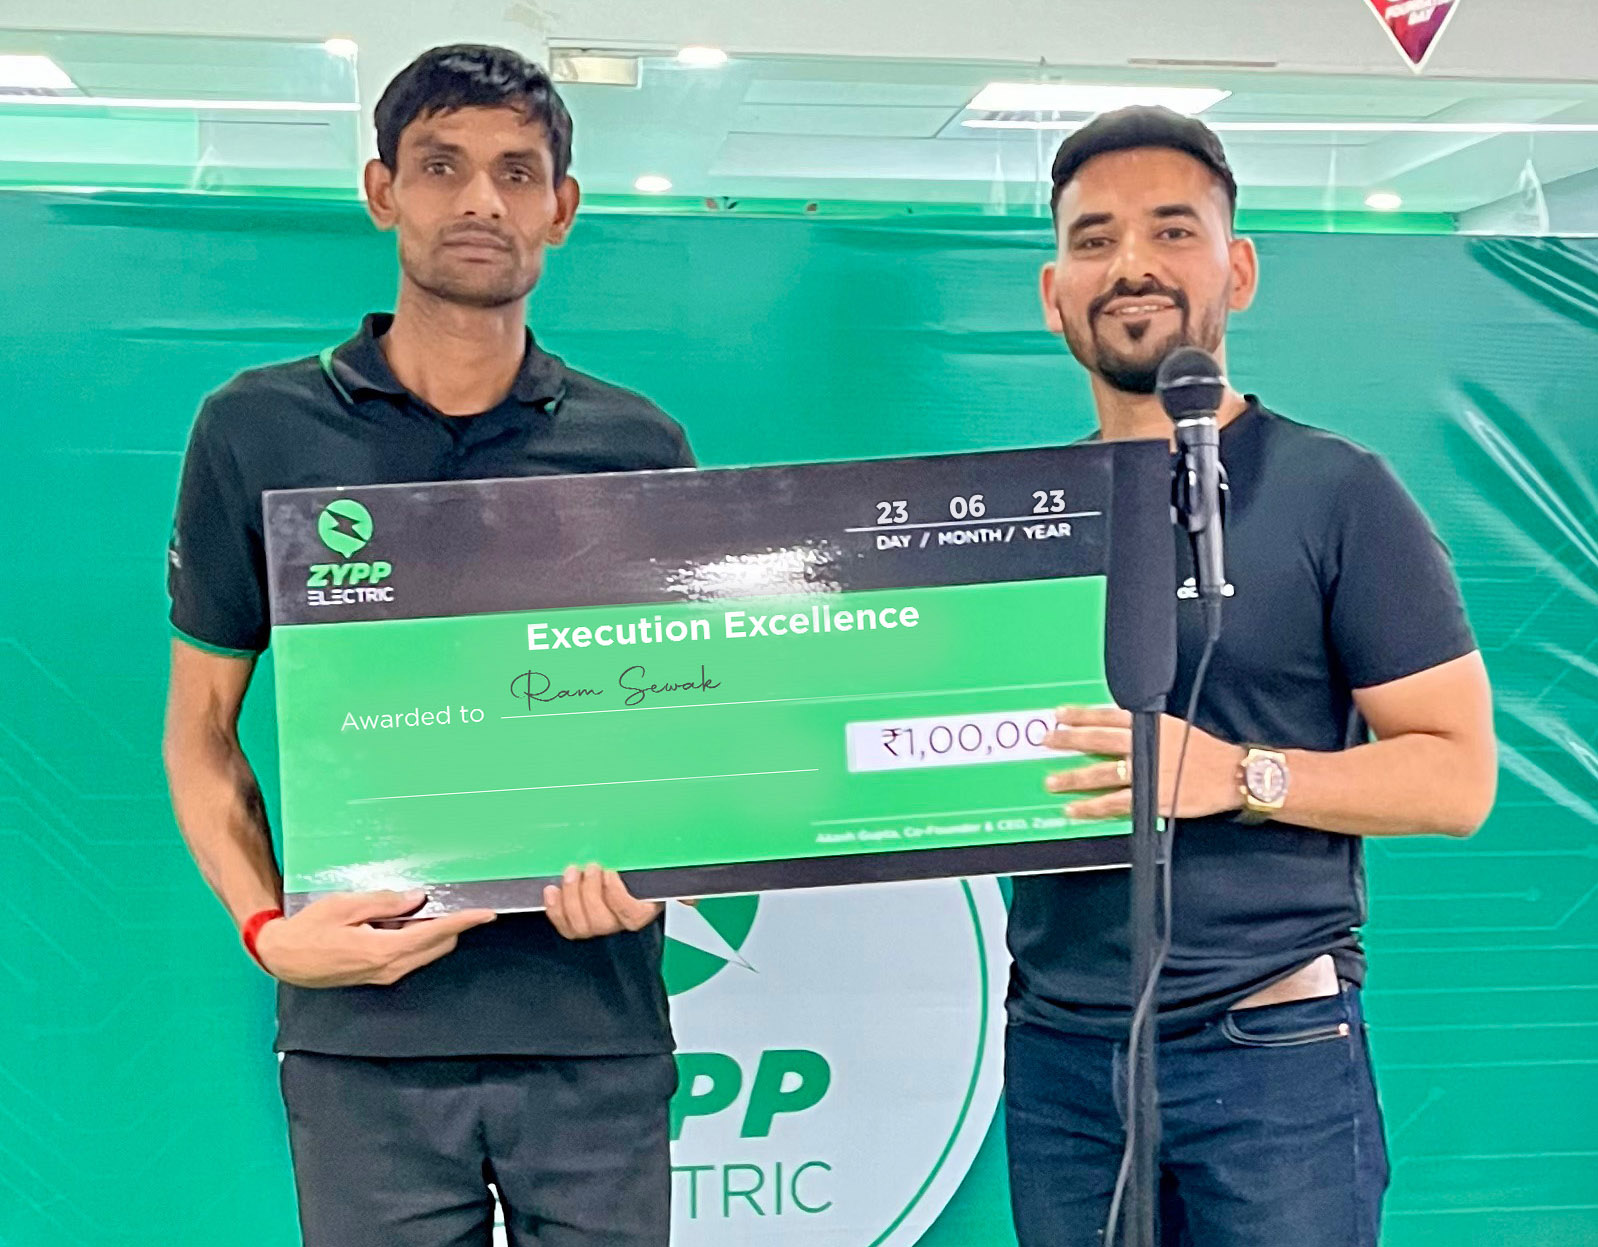 Zypp Electric empowers employees with INR 1.5 Cr ESOP buyback, a first in the EV industry